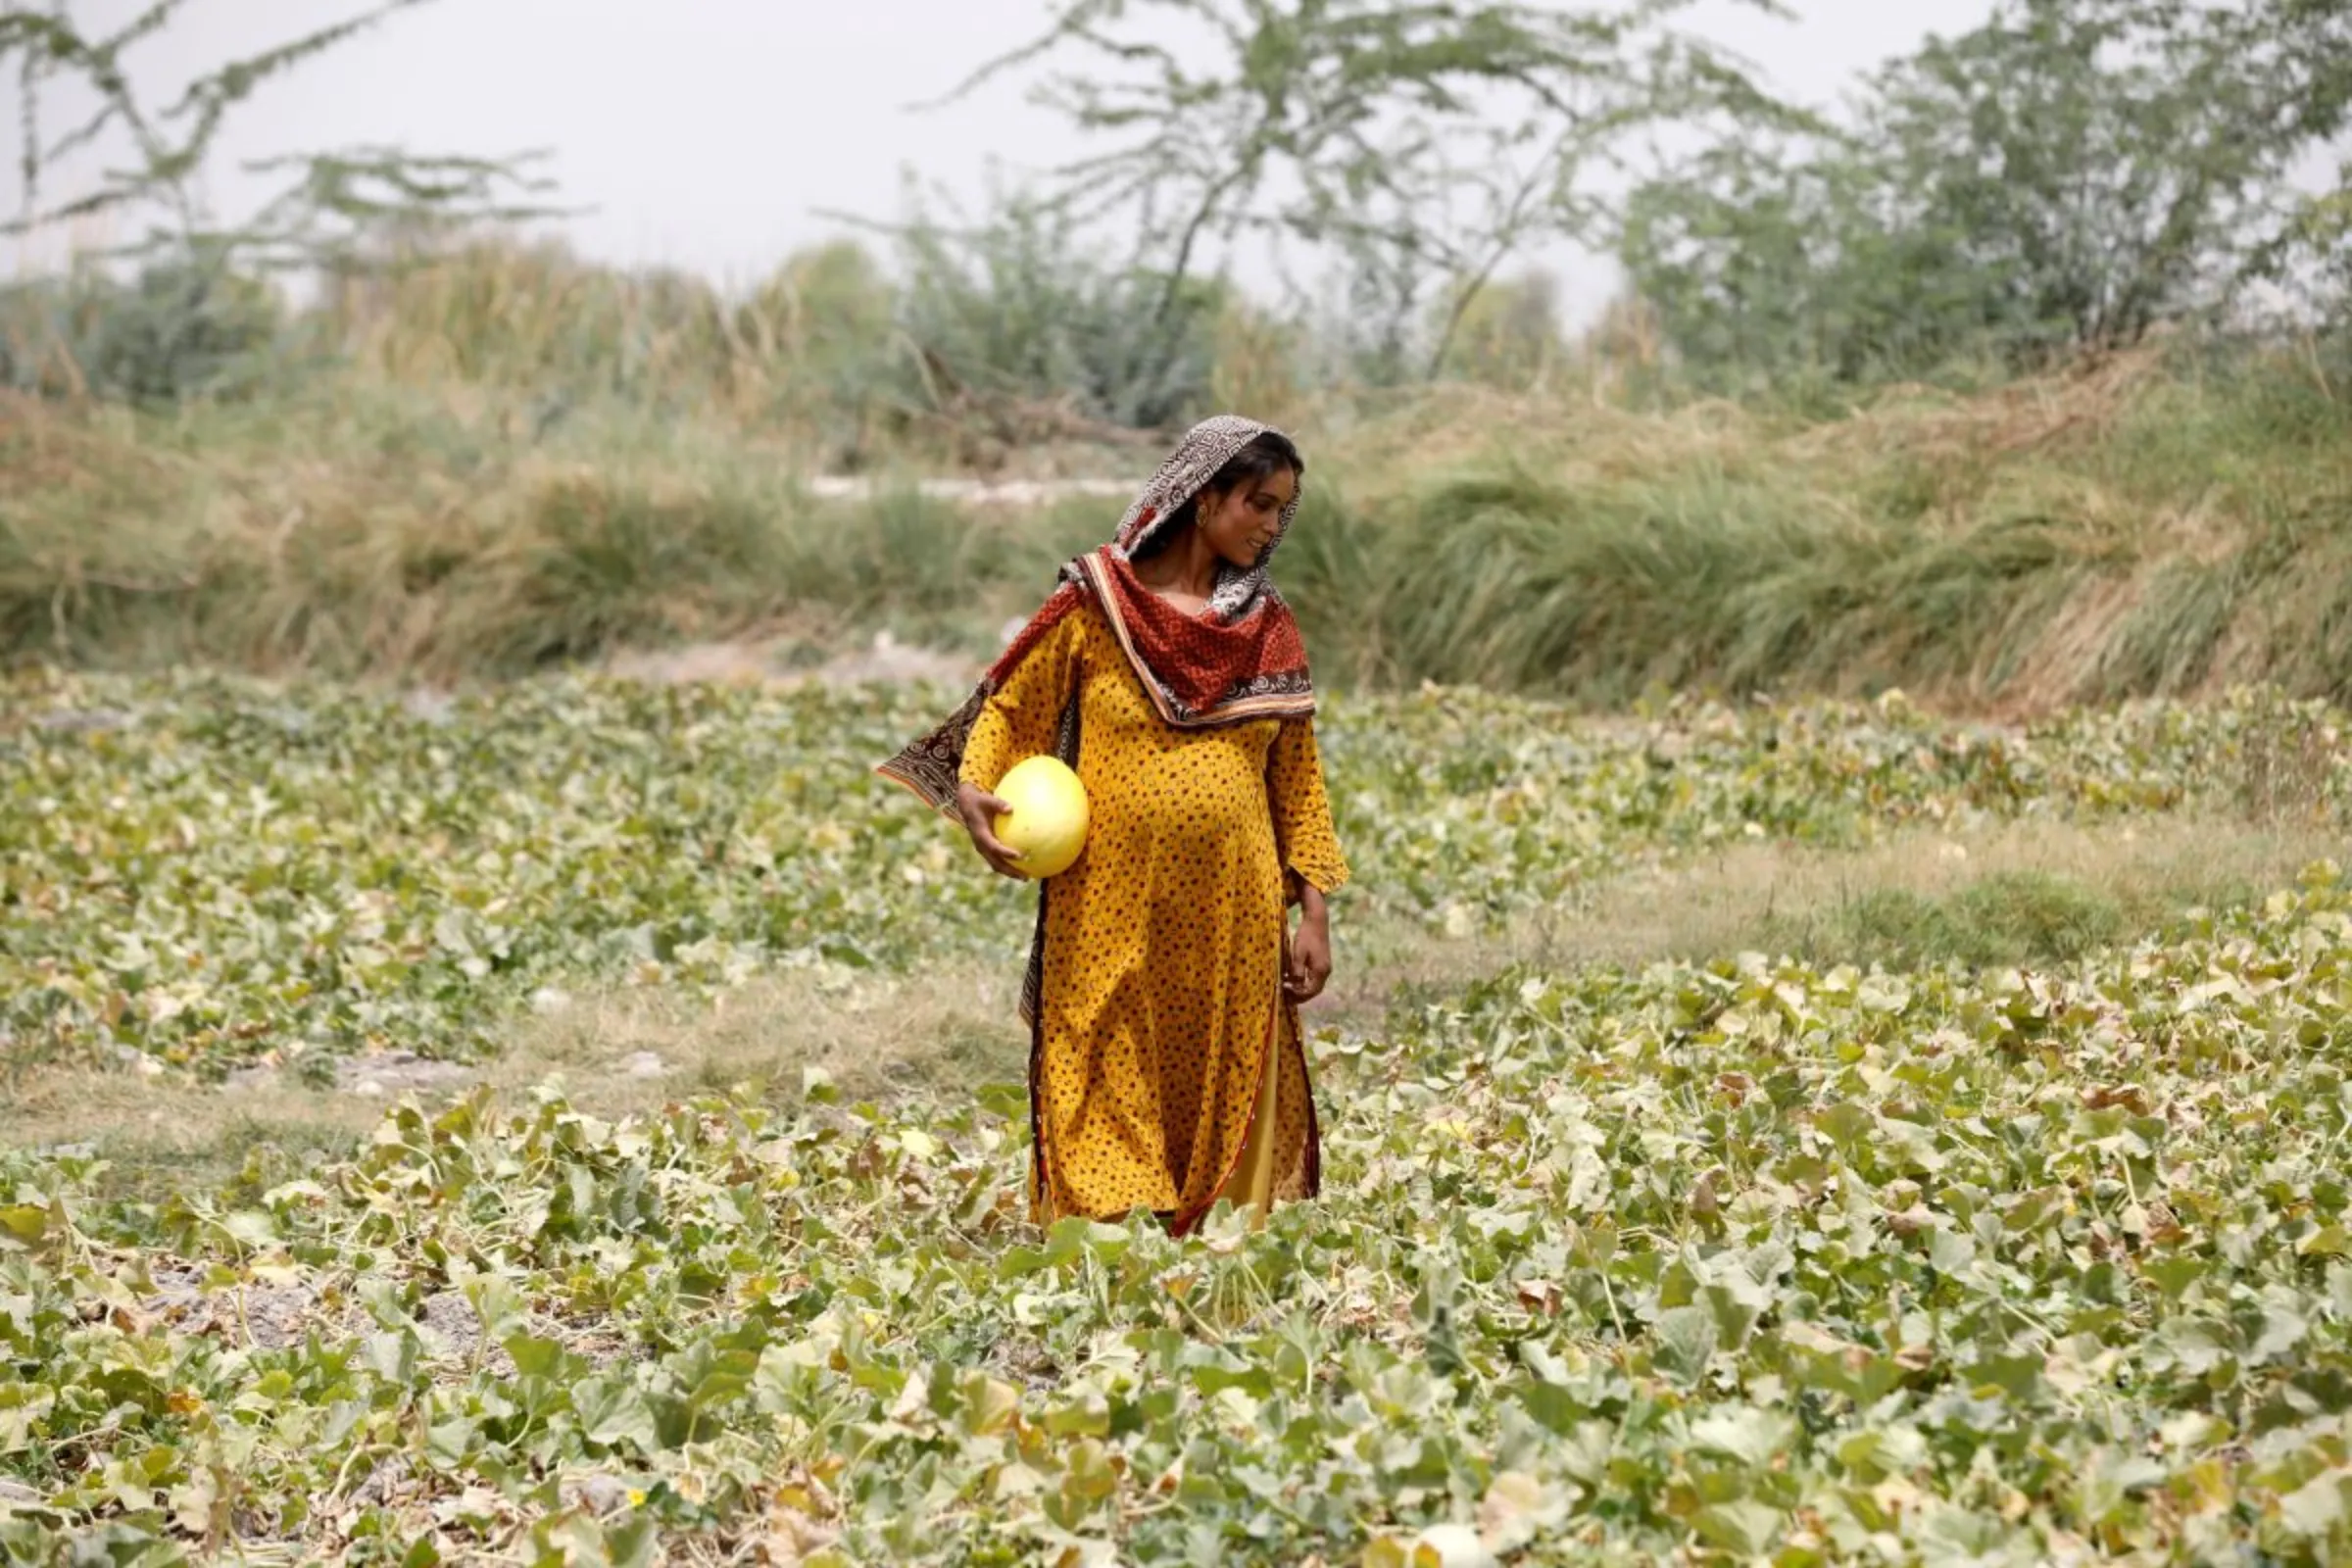 A heavily pregnant woman collects muskmelons during a heatwave, at a farm on the outskirts of Jacobabad, Pakistan, May 17, 2022